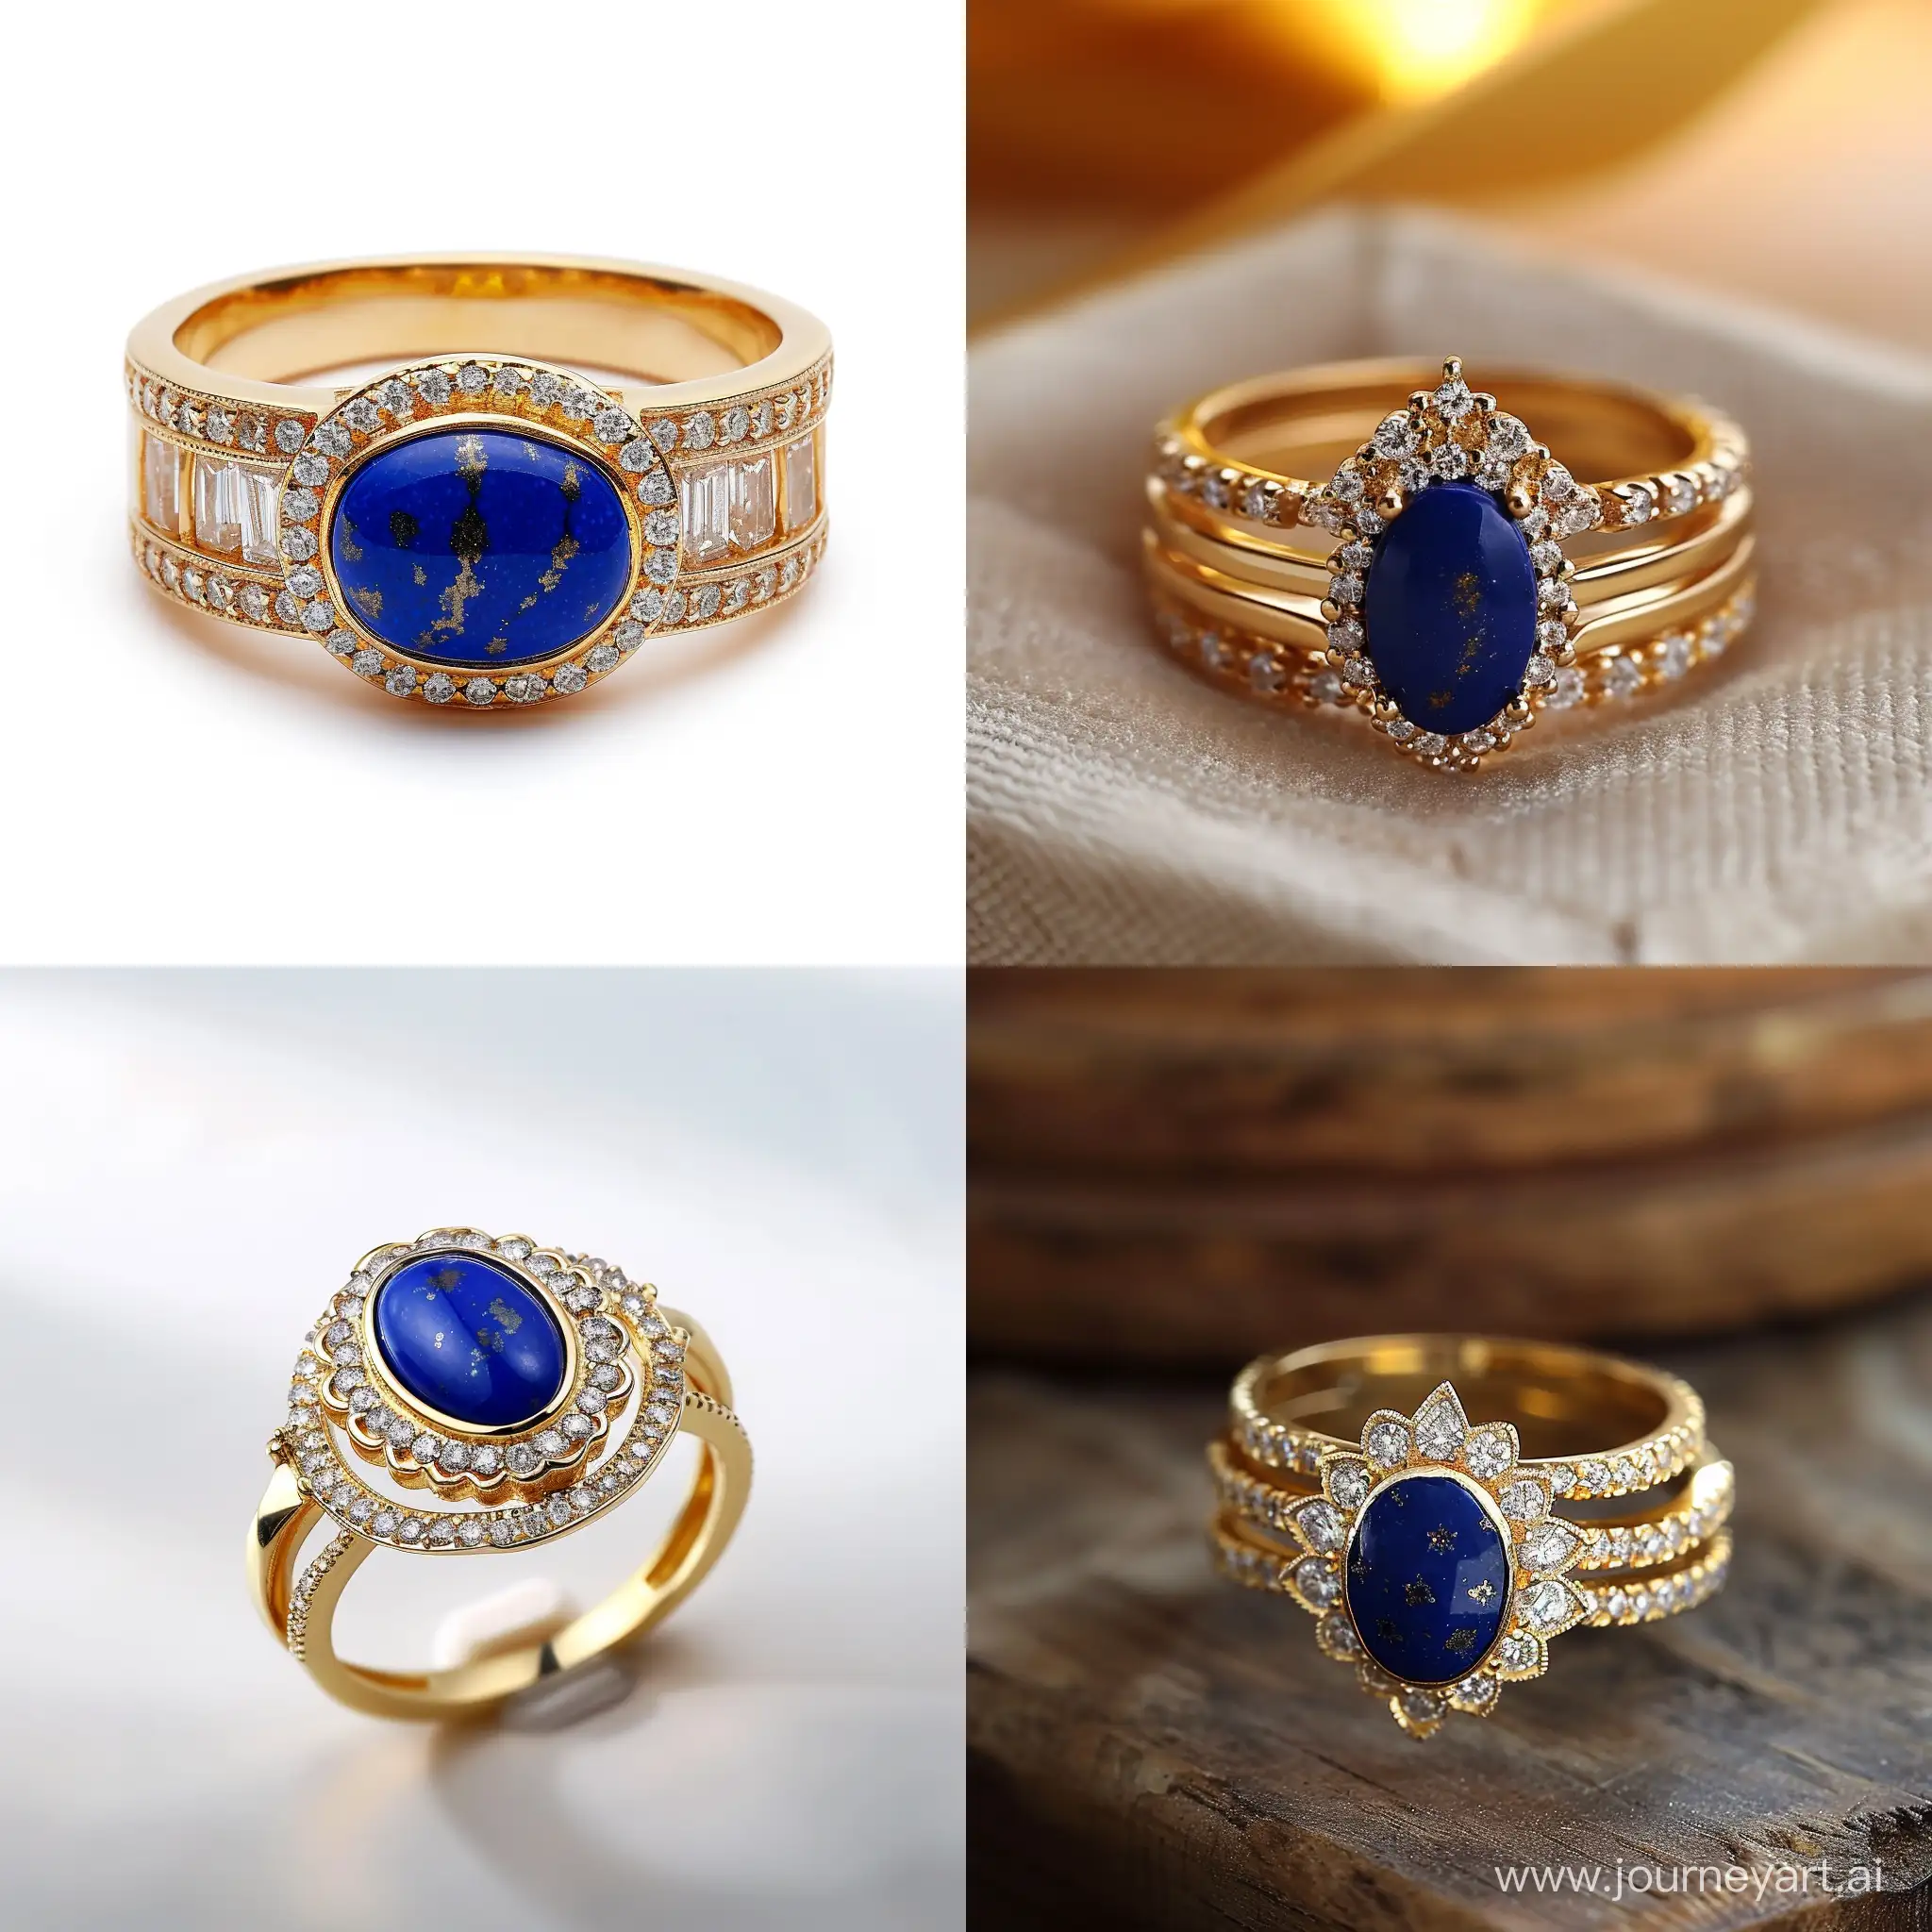 /imagine prompt gold ring with ovale cut lapis lazuli 2cm long and 1.5 cm wide and diamonds all around it art deco style set